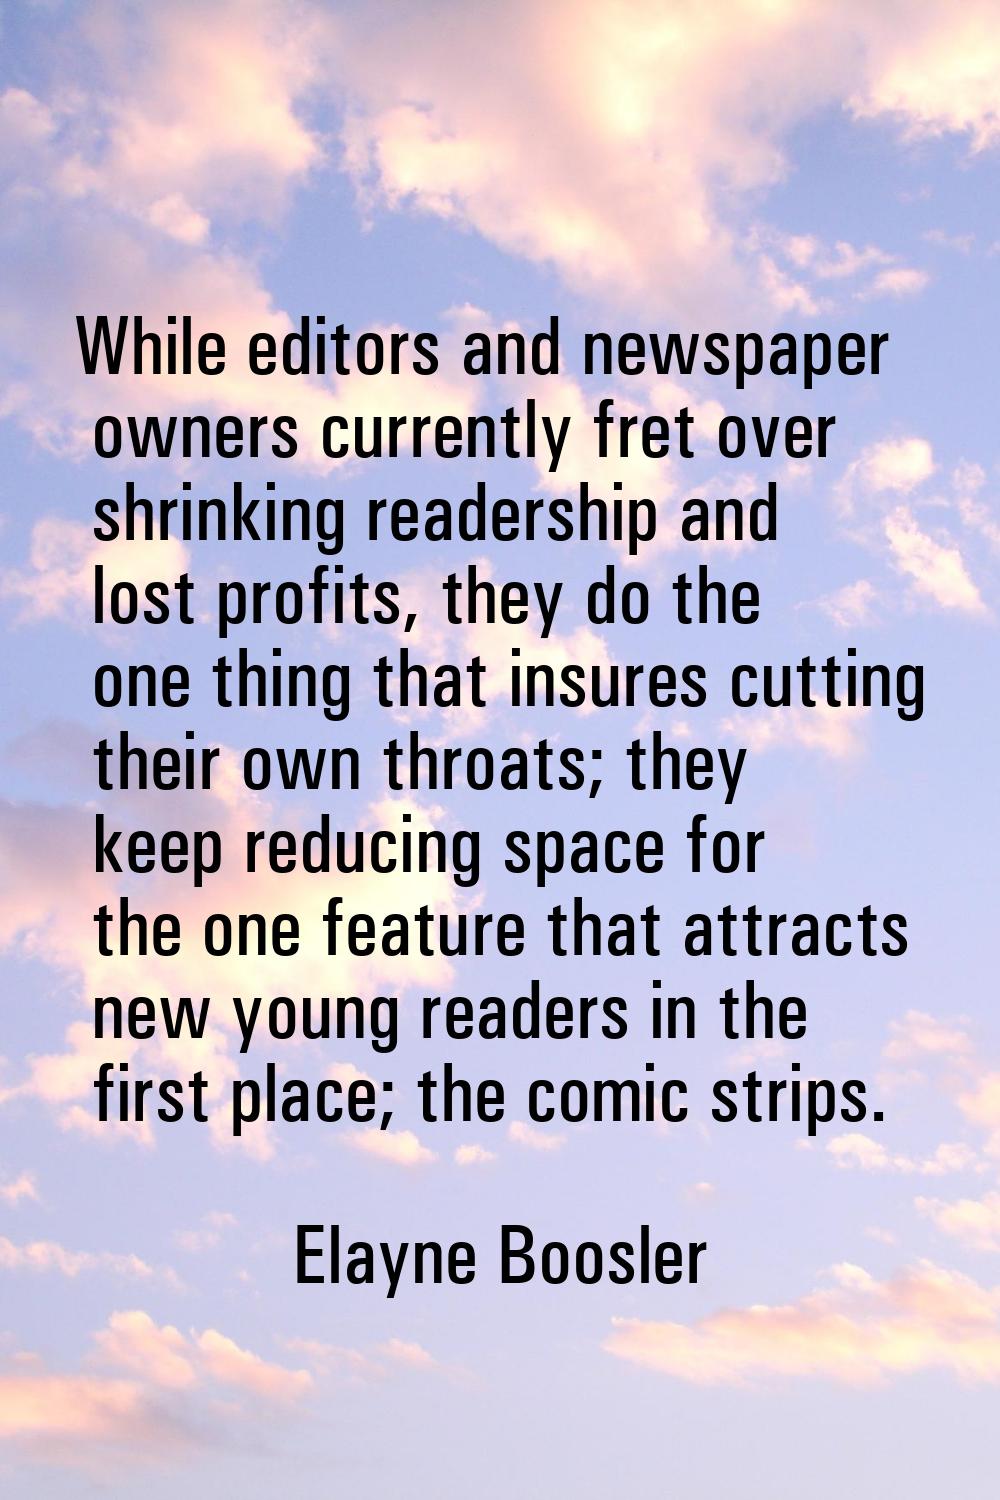 While editors and newspaper owners currently fret over shrinking readership and lost profits, they 